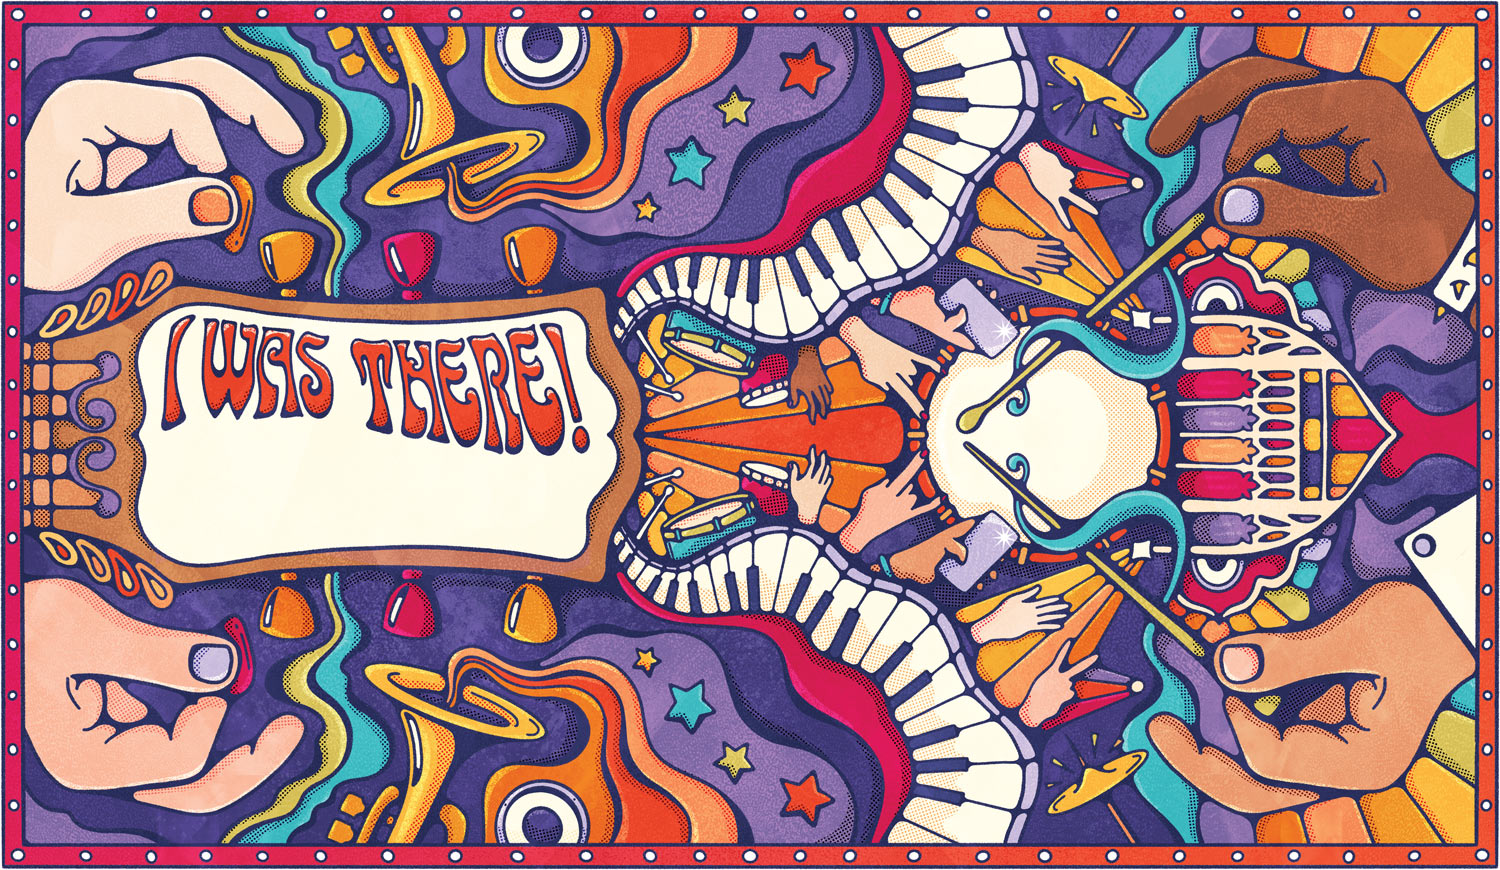 A multi-colored curvy illustration - Headline: I was there! Image features hands and musical instruments, including drums, trumpets, keyboards, and guitars, rendered with wavy lines in bright, creating a psychedelic effect.